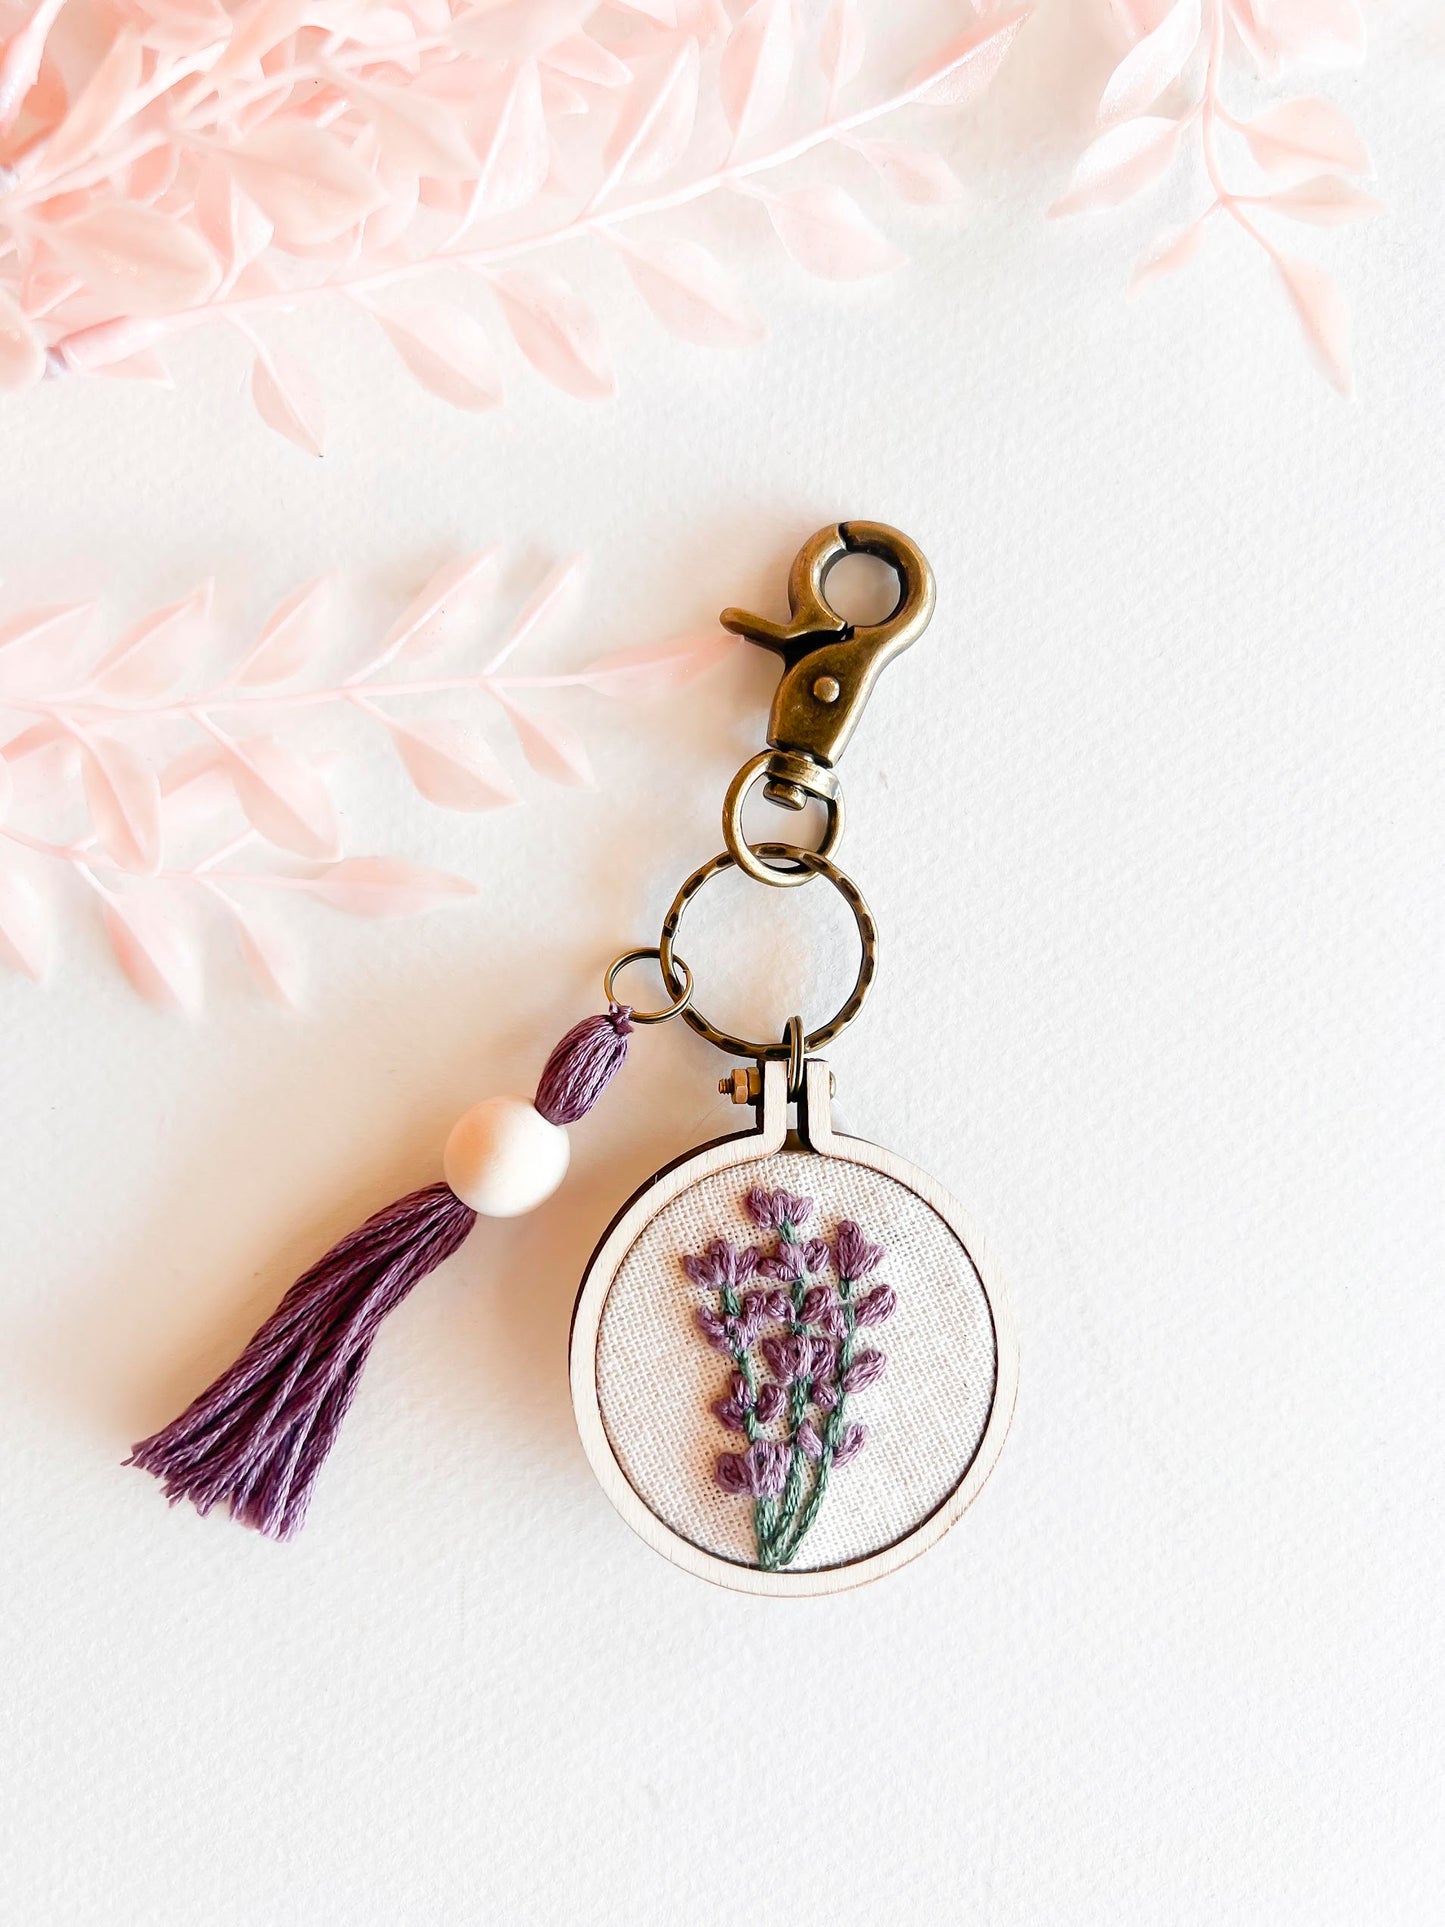 Kripyery Key Chain Lightweight Round Hoop Faux Leather Colorful Tassel  Flower Print Key Rings Daily Use Supply